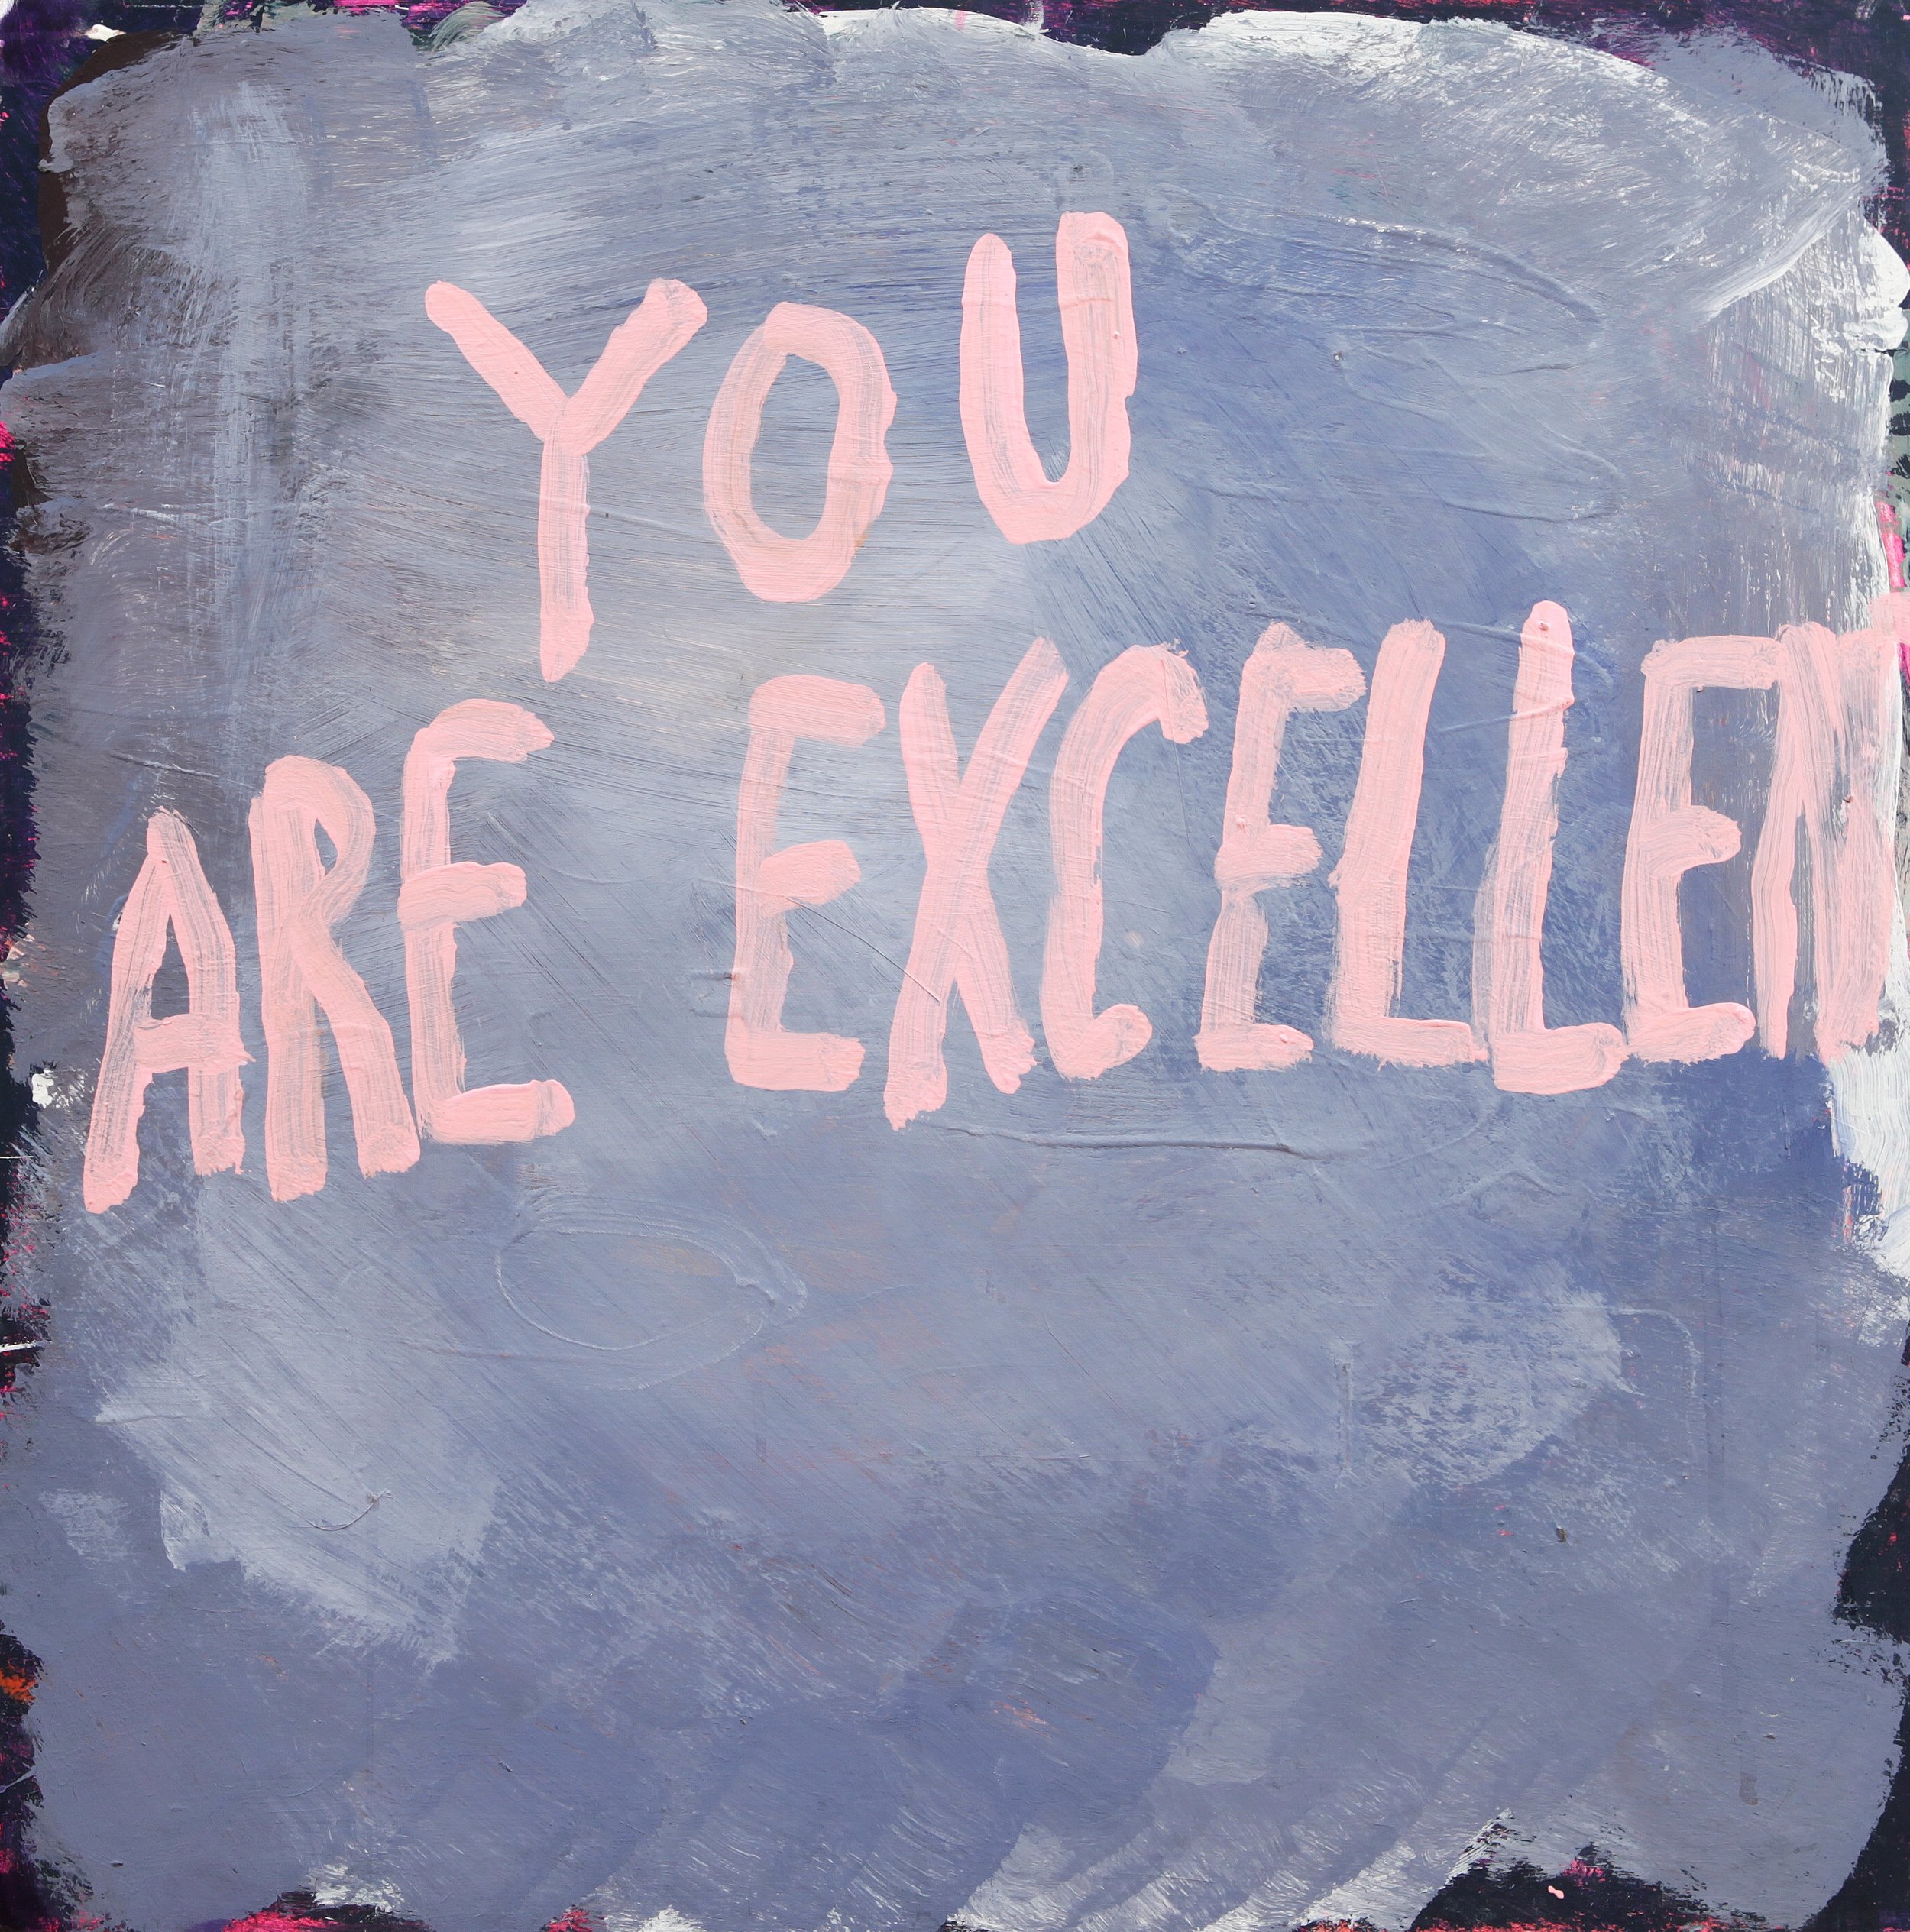 YOU ARE EXCELLENT